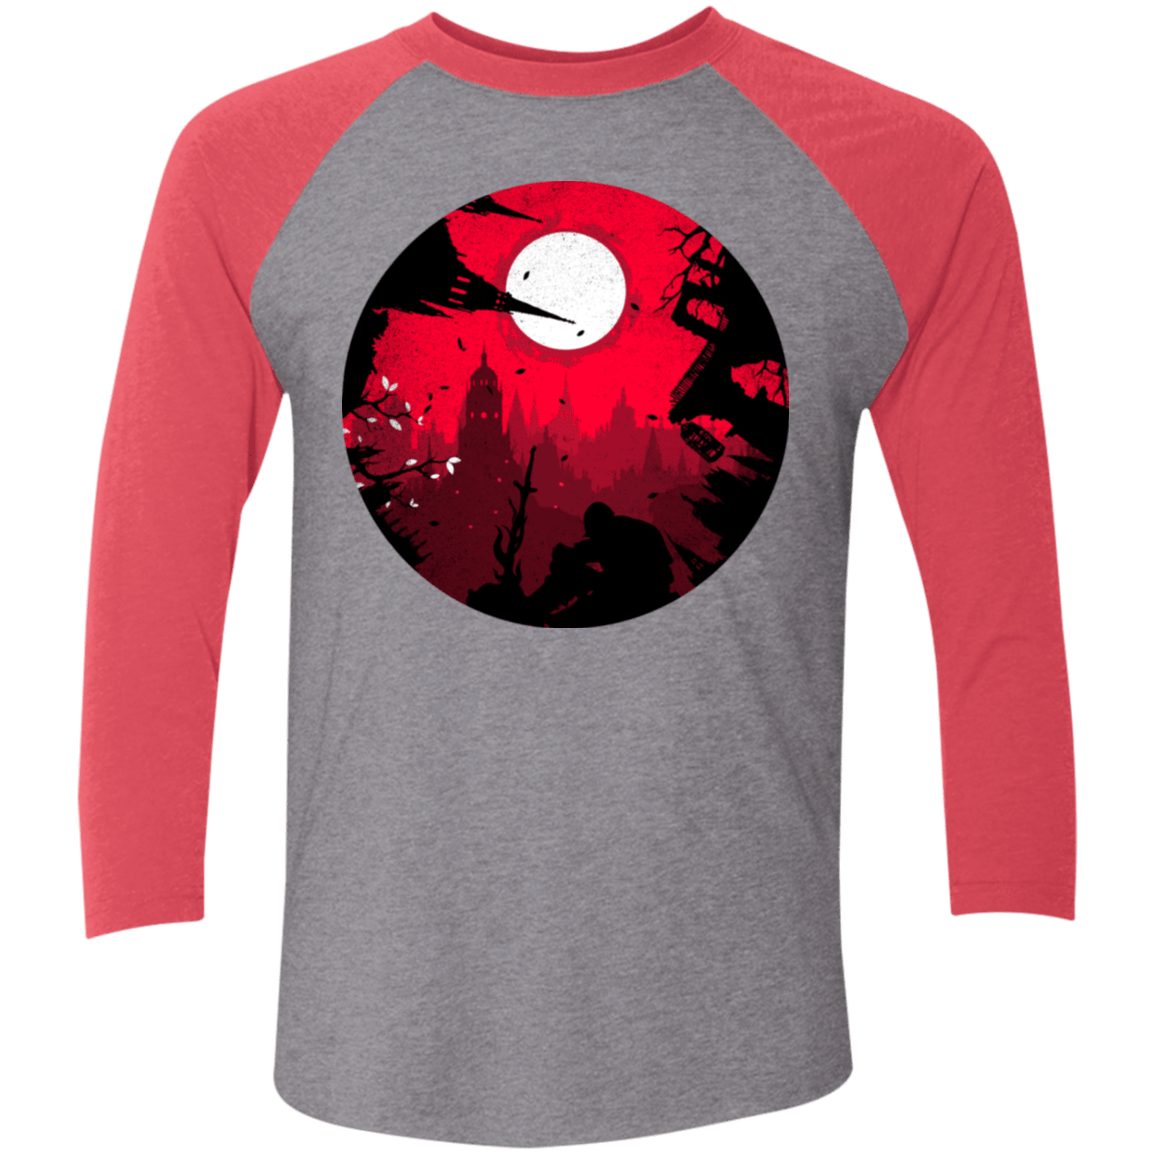 T-Shirts Premium Heather/Vintage Red / X-Small Embrace the Darkness Men's Triblend 3/4 Sleeve